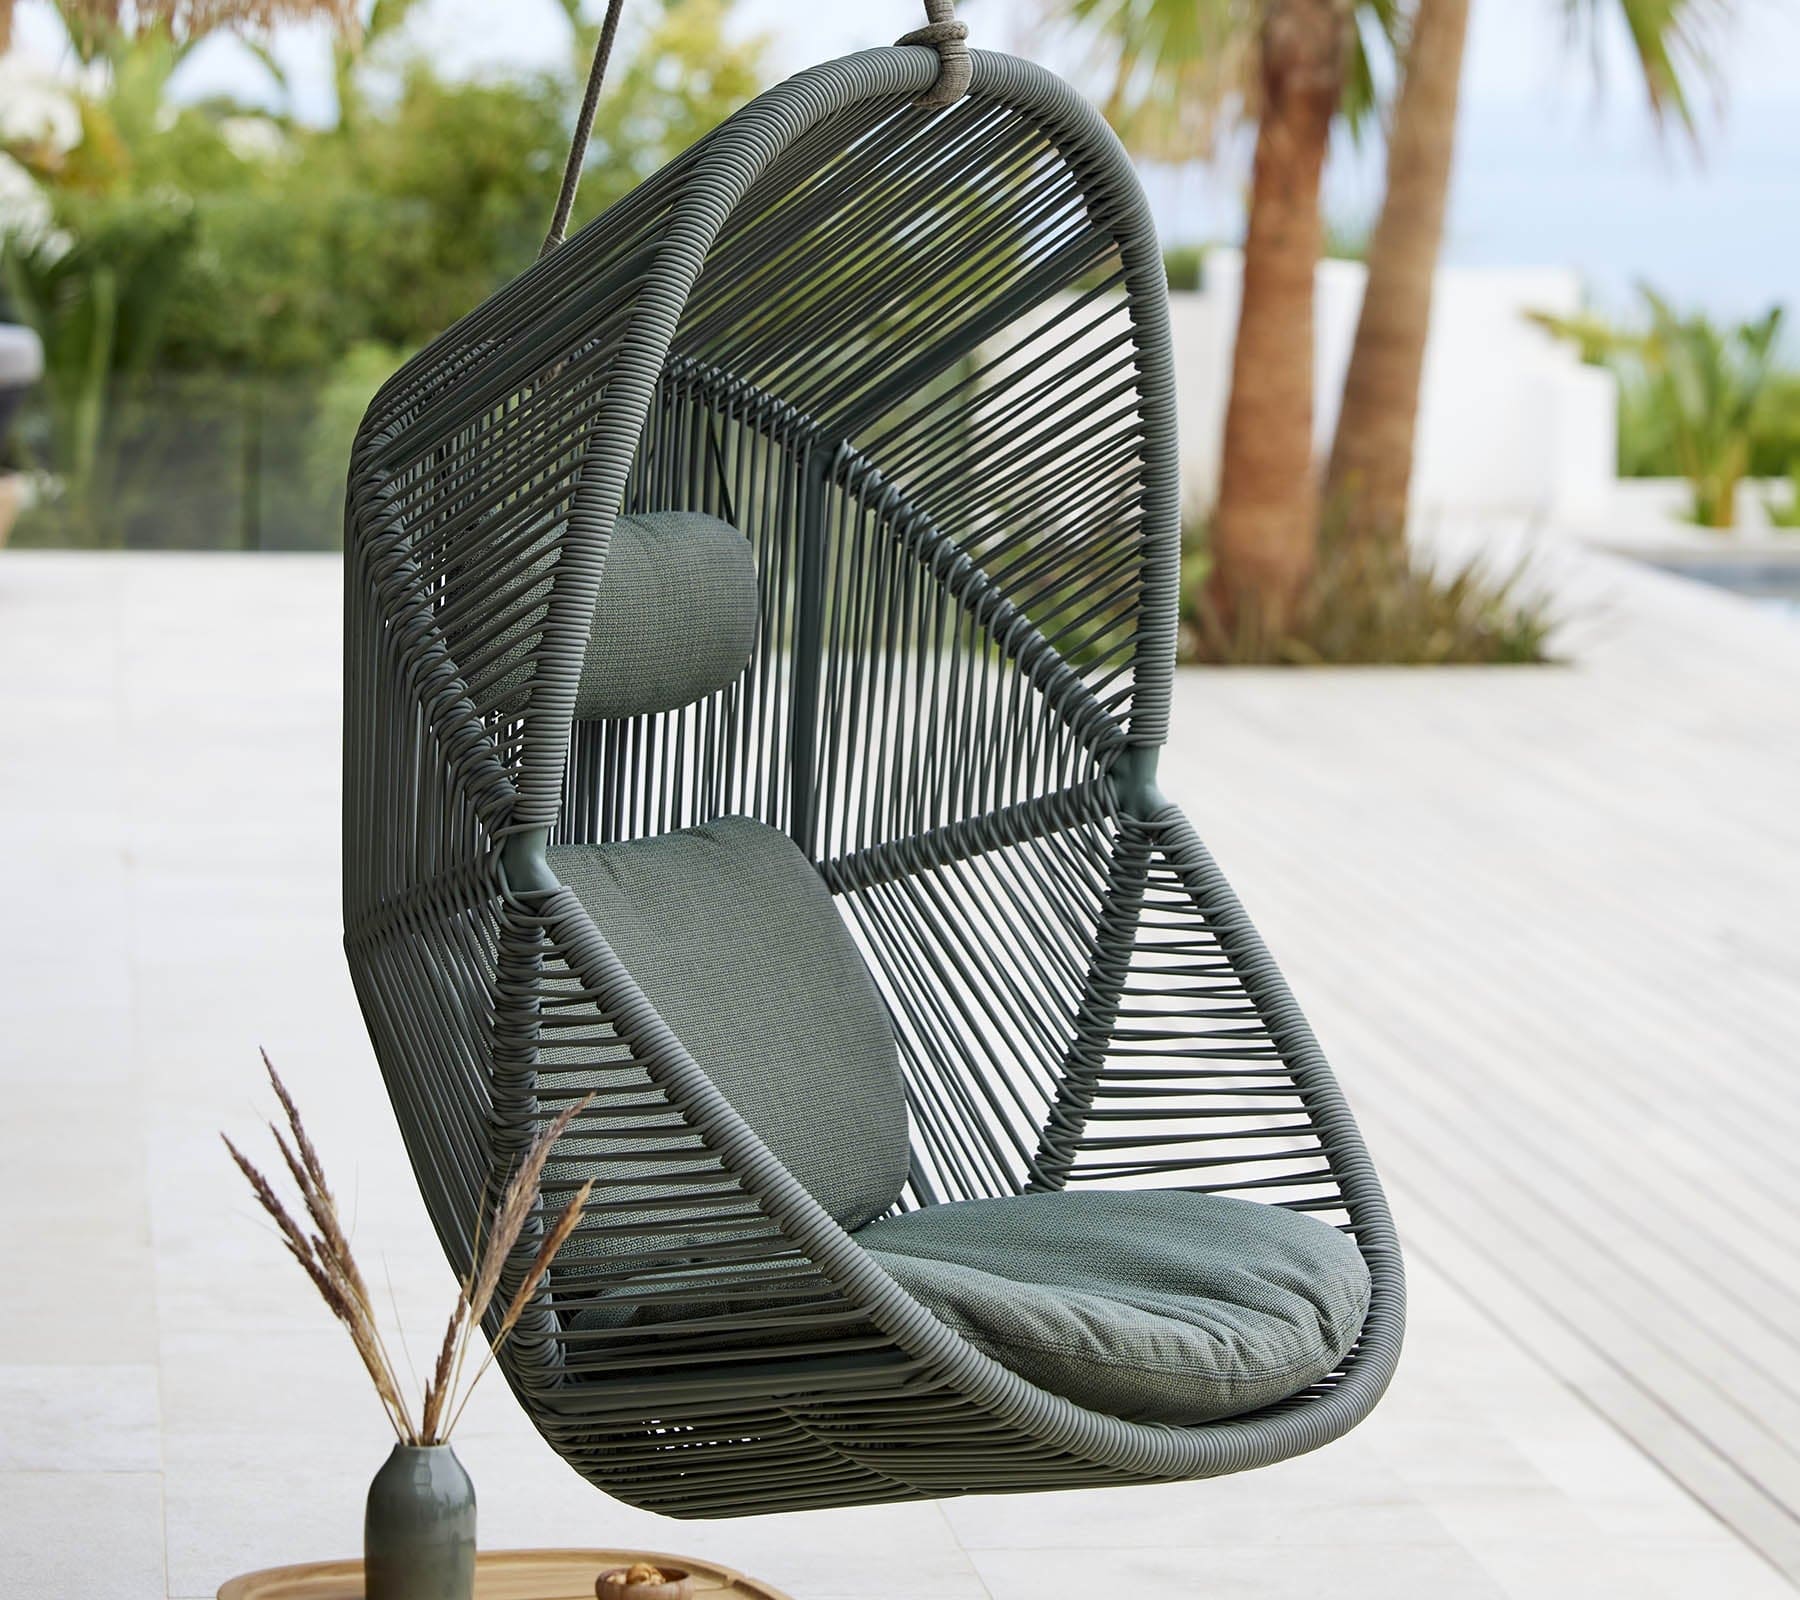 Boxhill's Hive Outdoor Hanging Chair Dusty Green Frame Lifestyle image near poolside